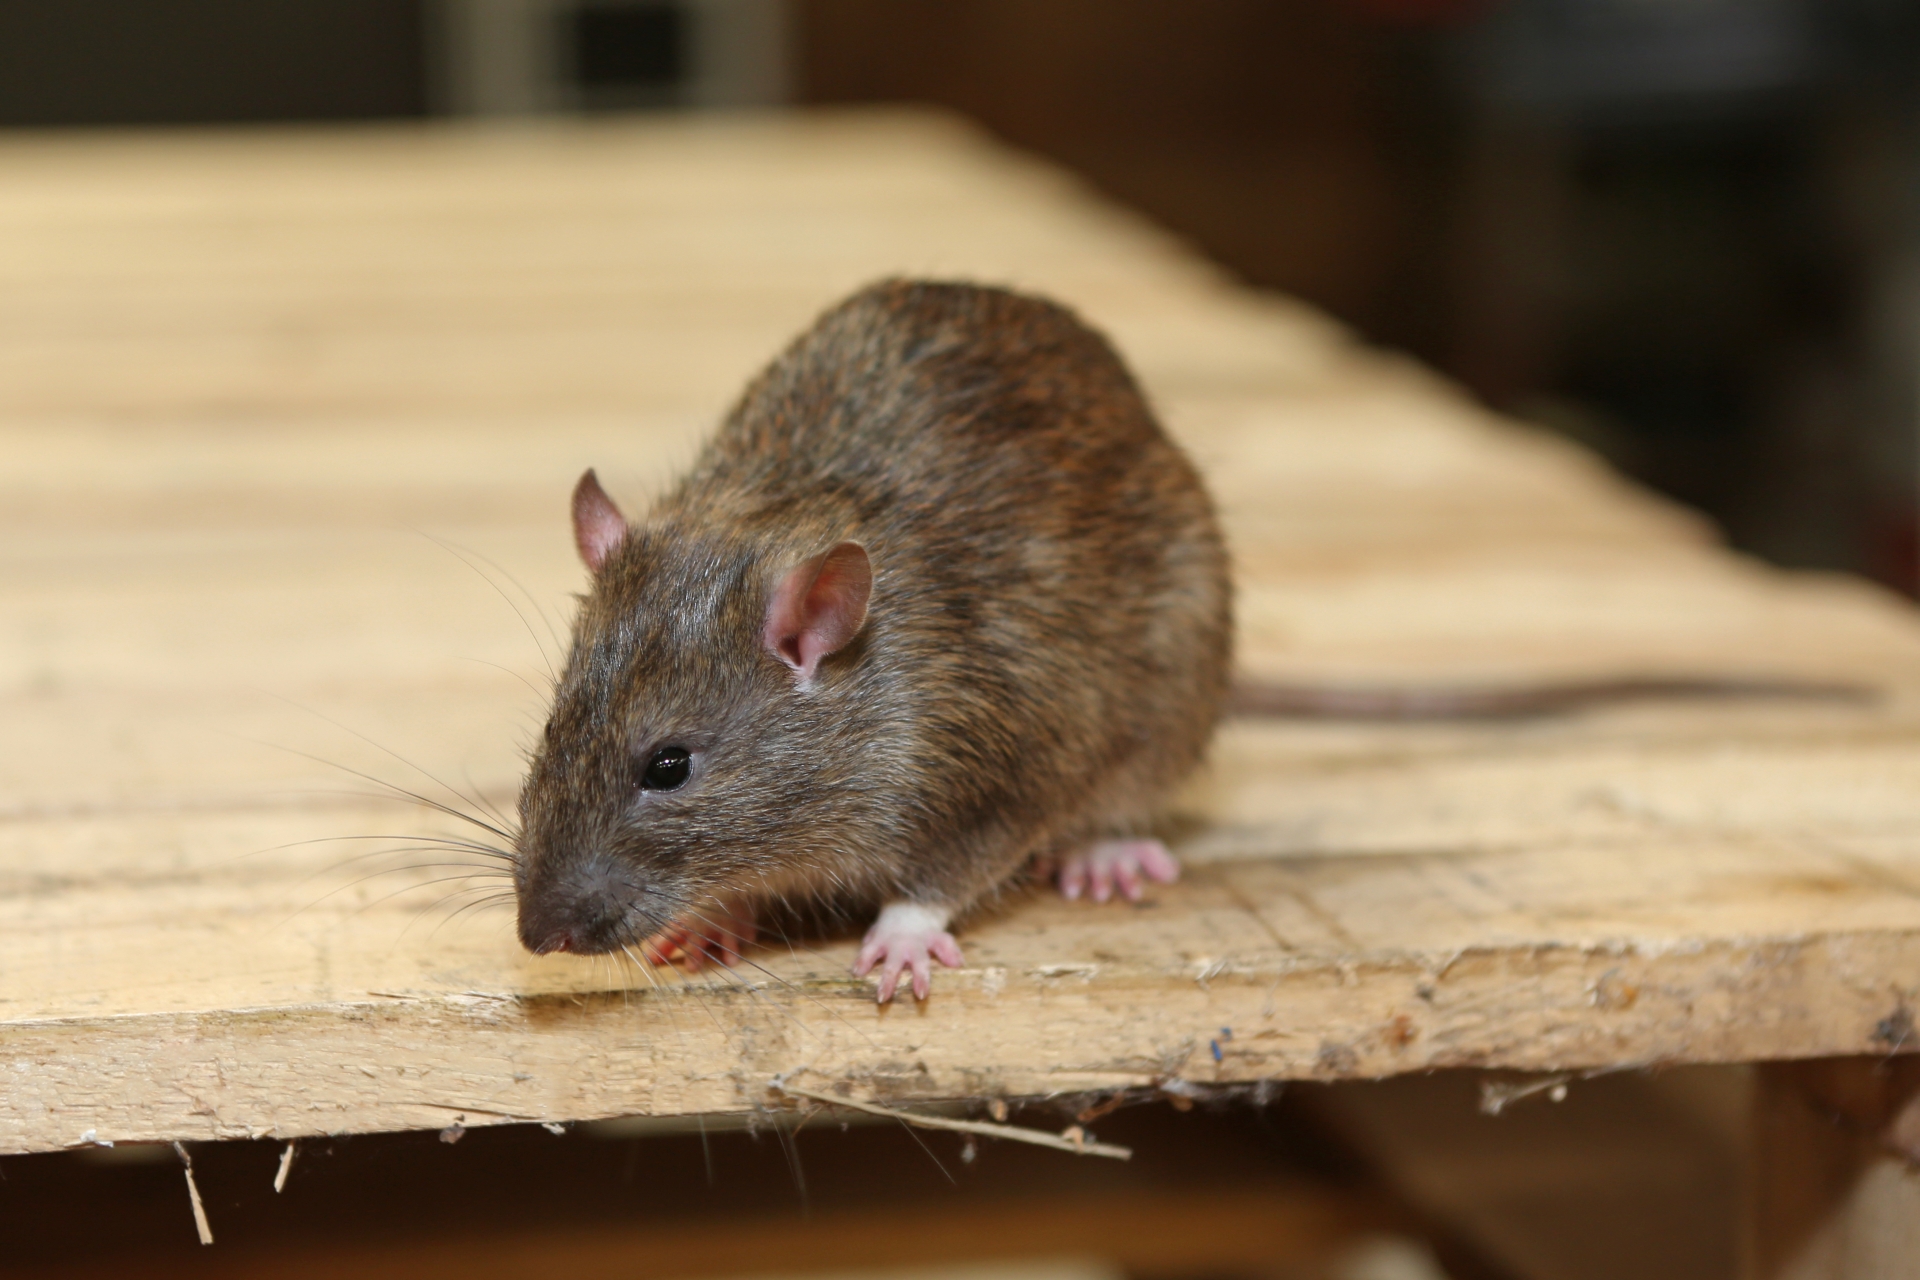 Rat extermination, Pest Control in Holloway, N7 . Call Now 020 8166 9746